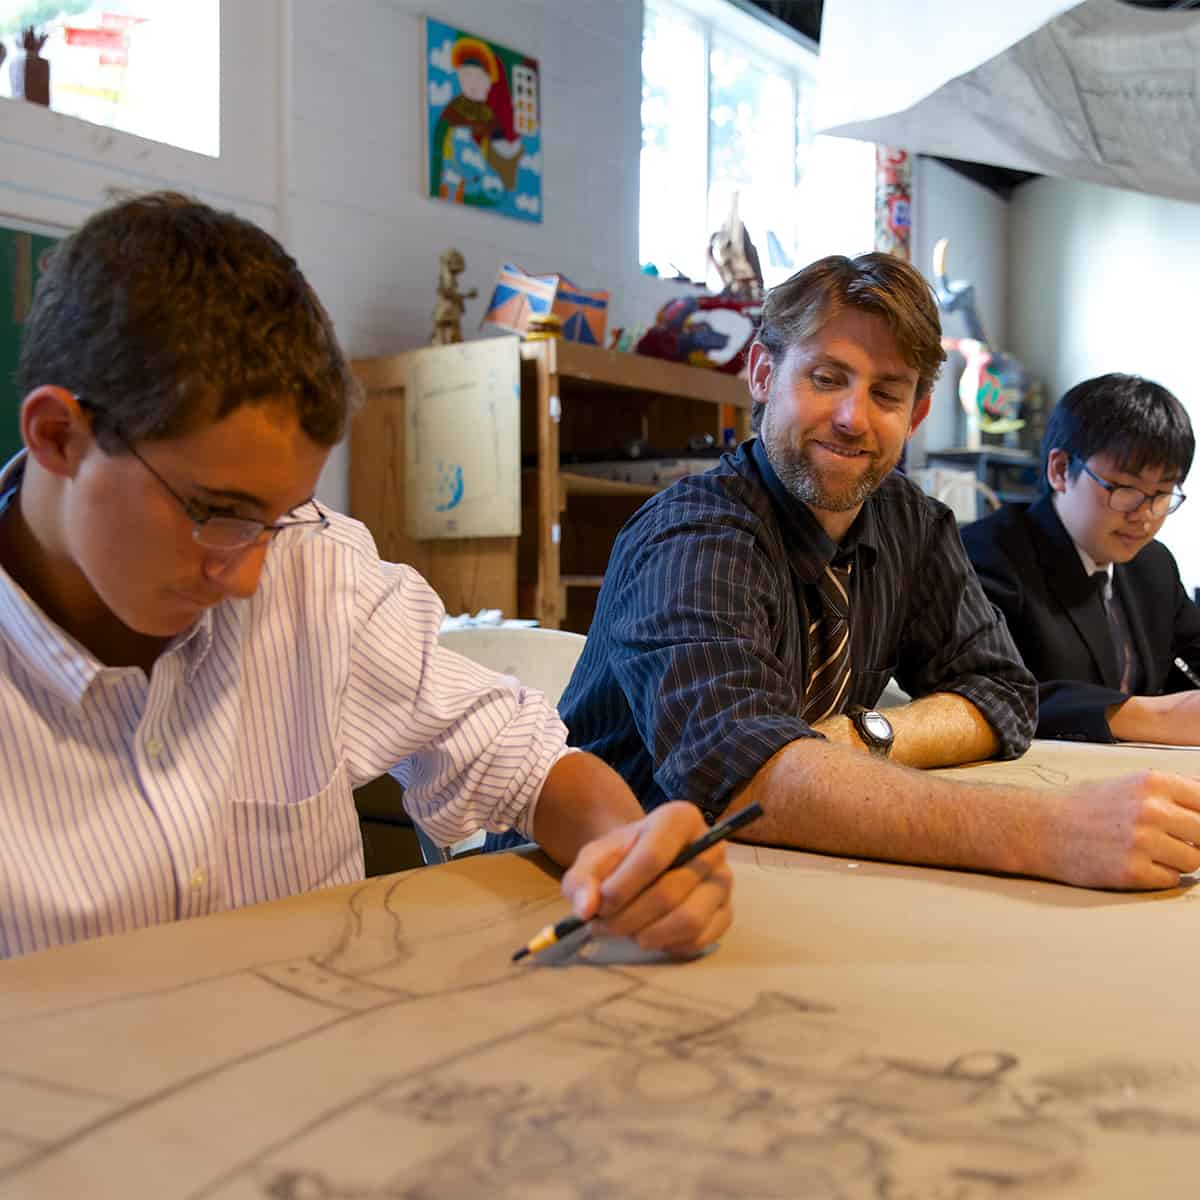 Teacher with students in art class.